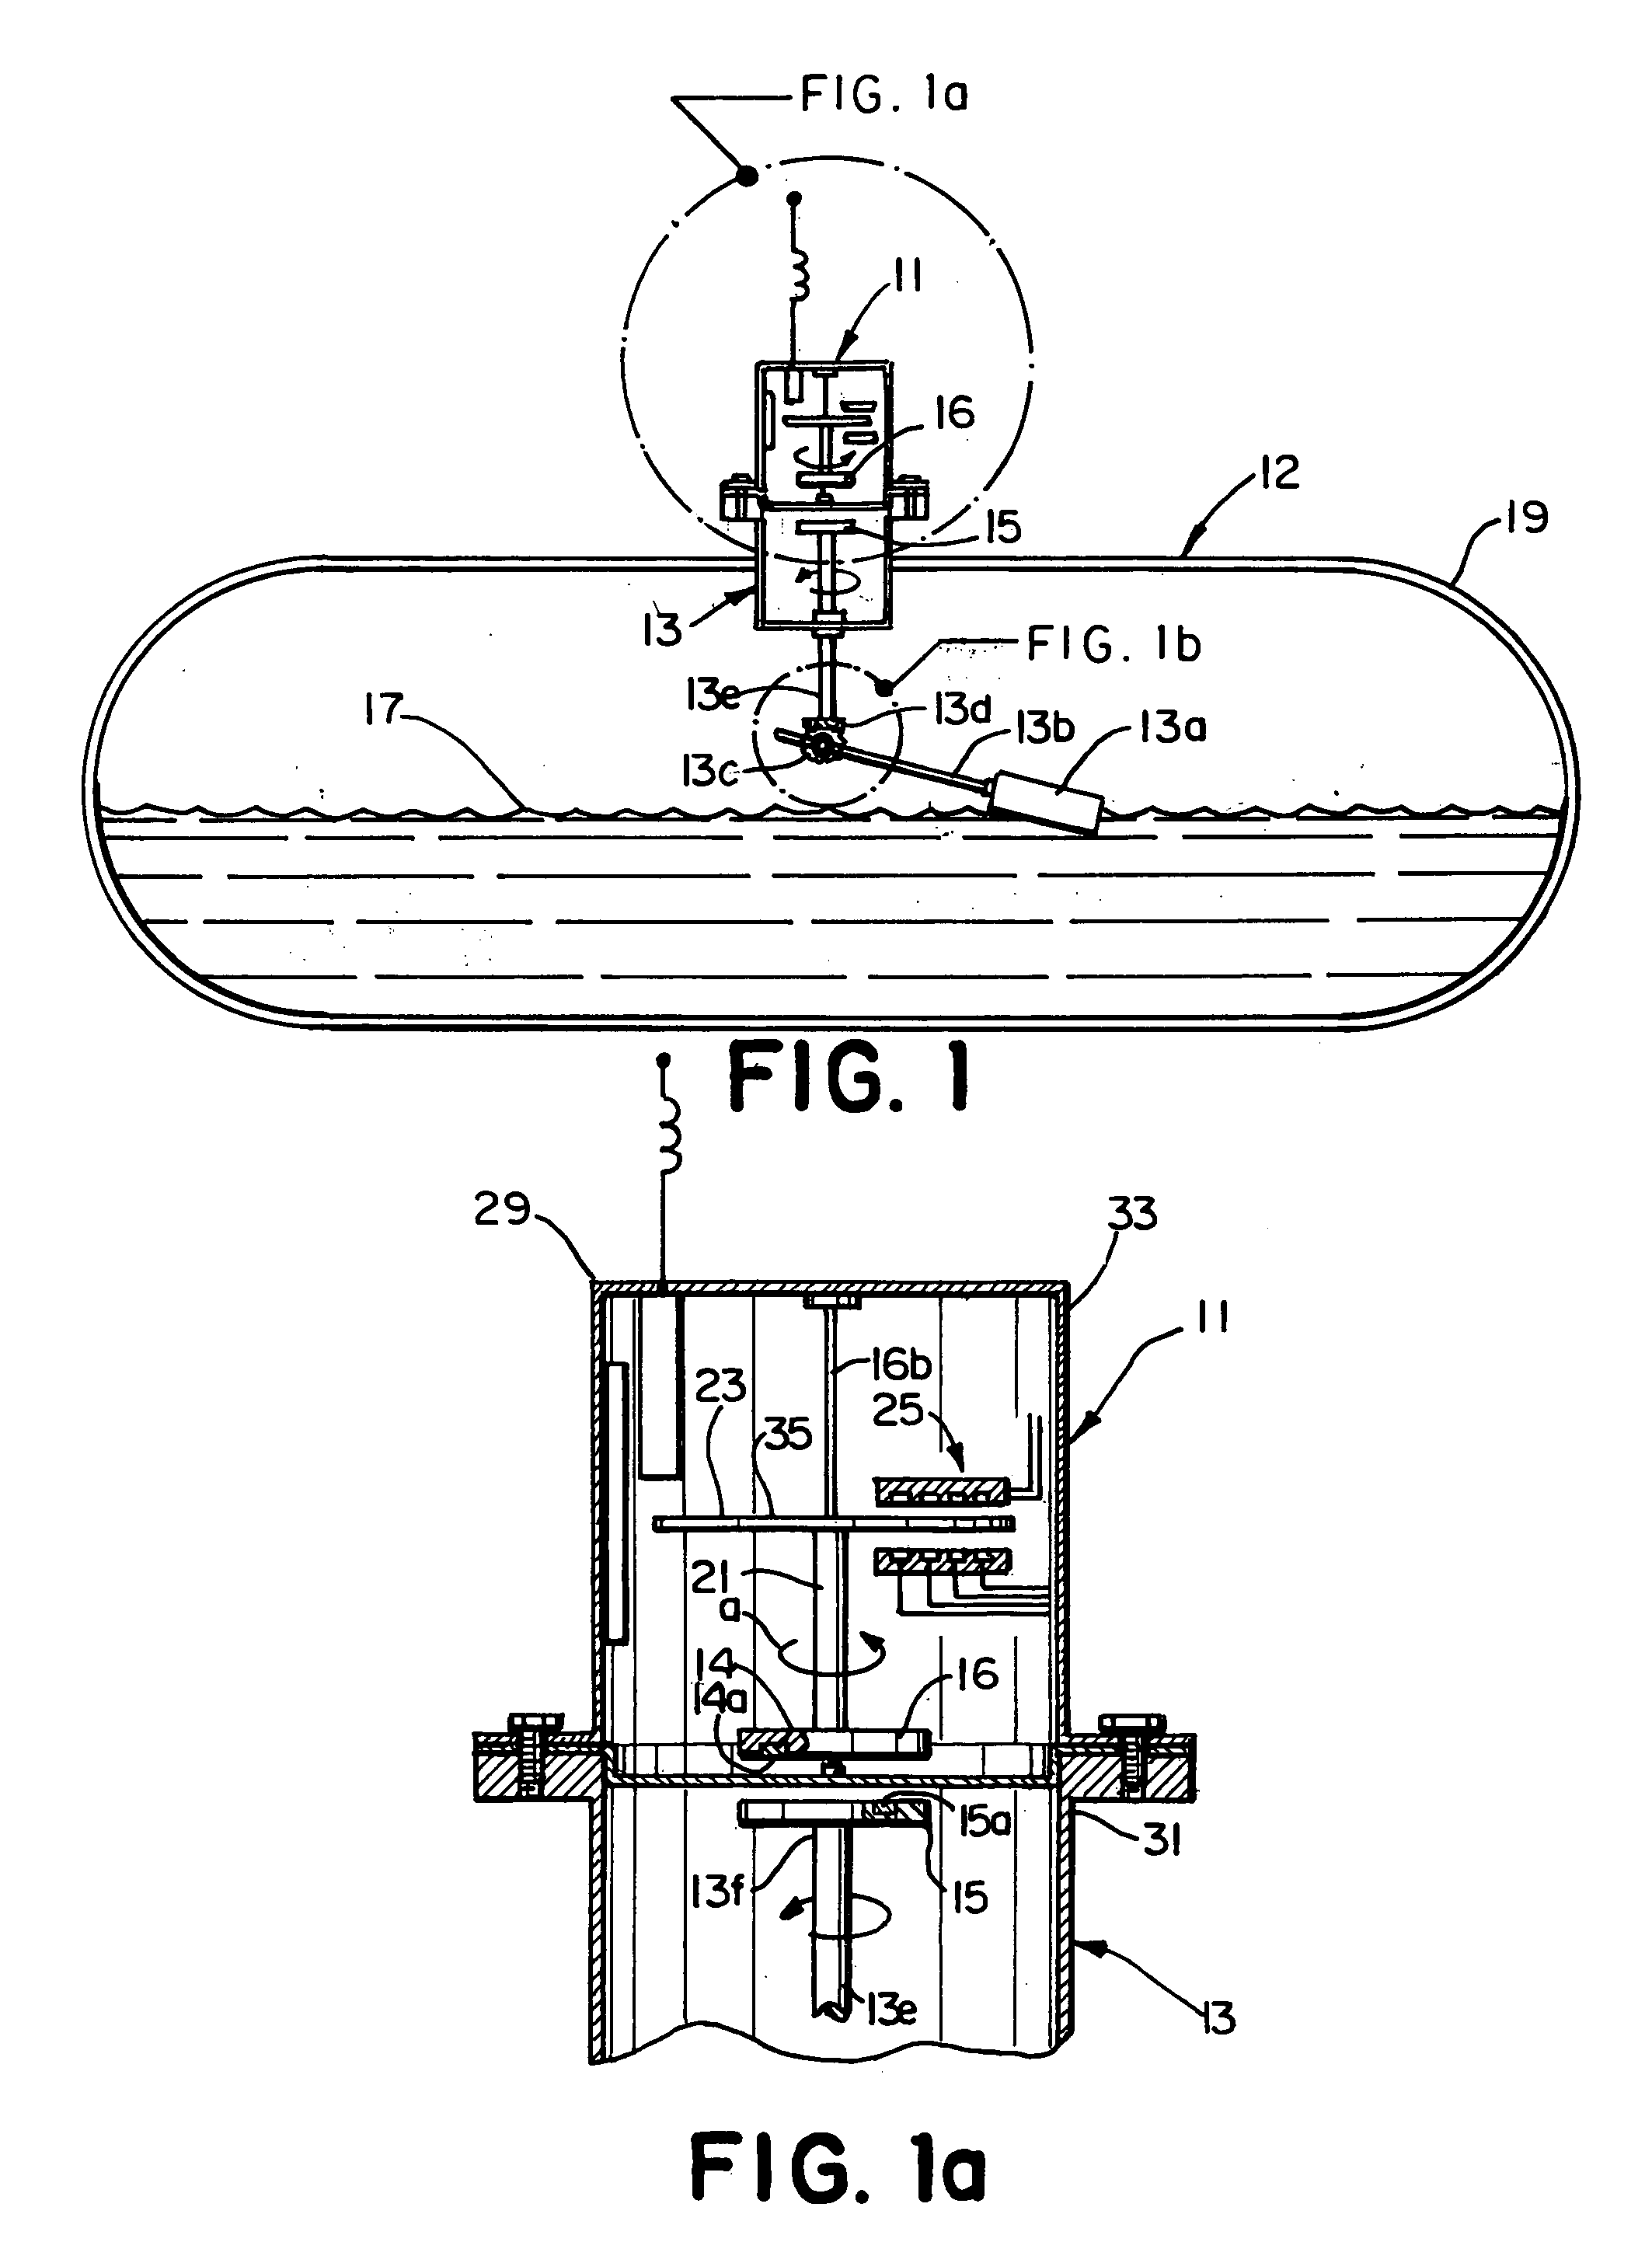 Remote liquid level gauge for remote sensing, system for employing the gauge and method of use